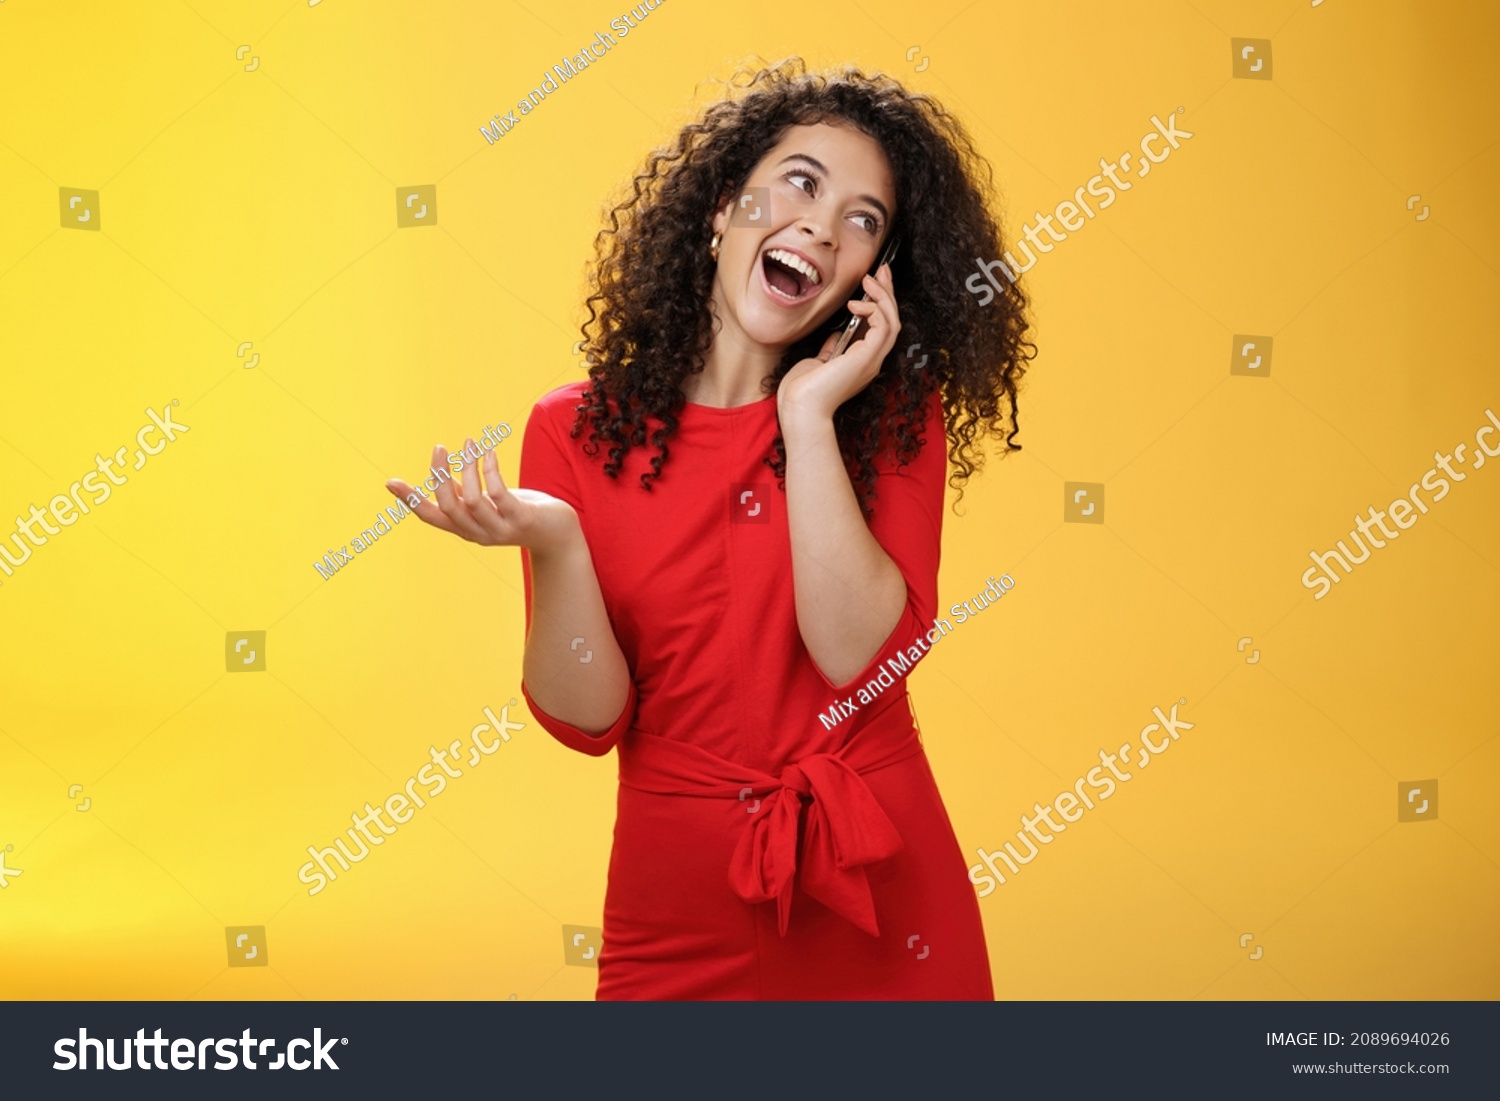 Talkative glamour silly girl with curly hair having fun feeling carefree and happy taling on mobile phone turning away as laughing joyfully gesturing with hand holding smartphone pressed to ear #2089694026